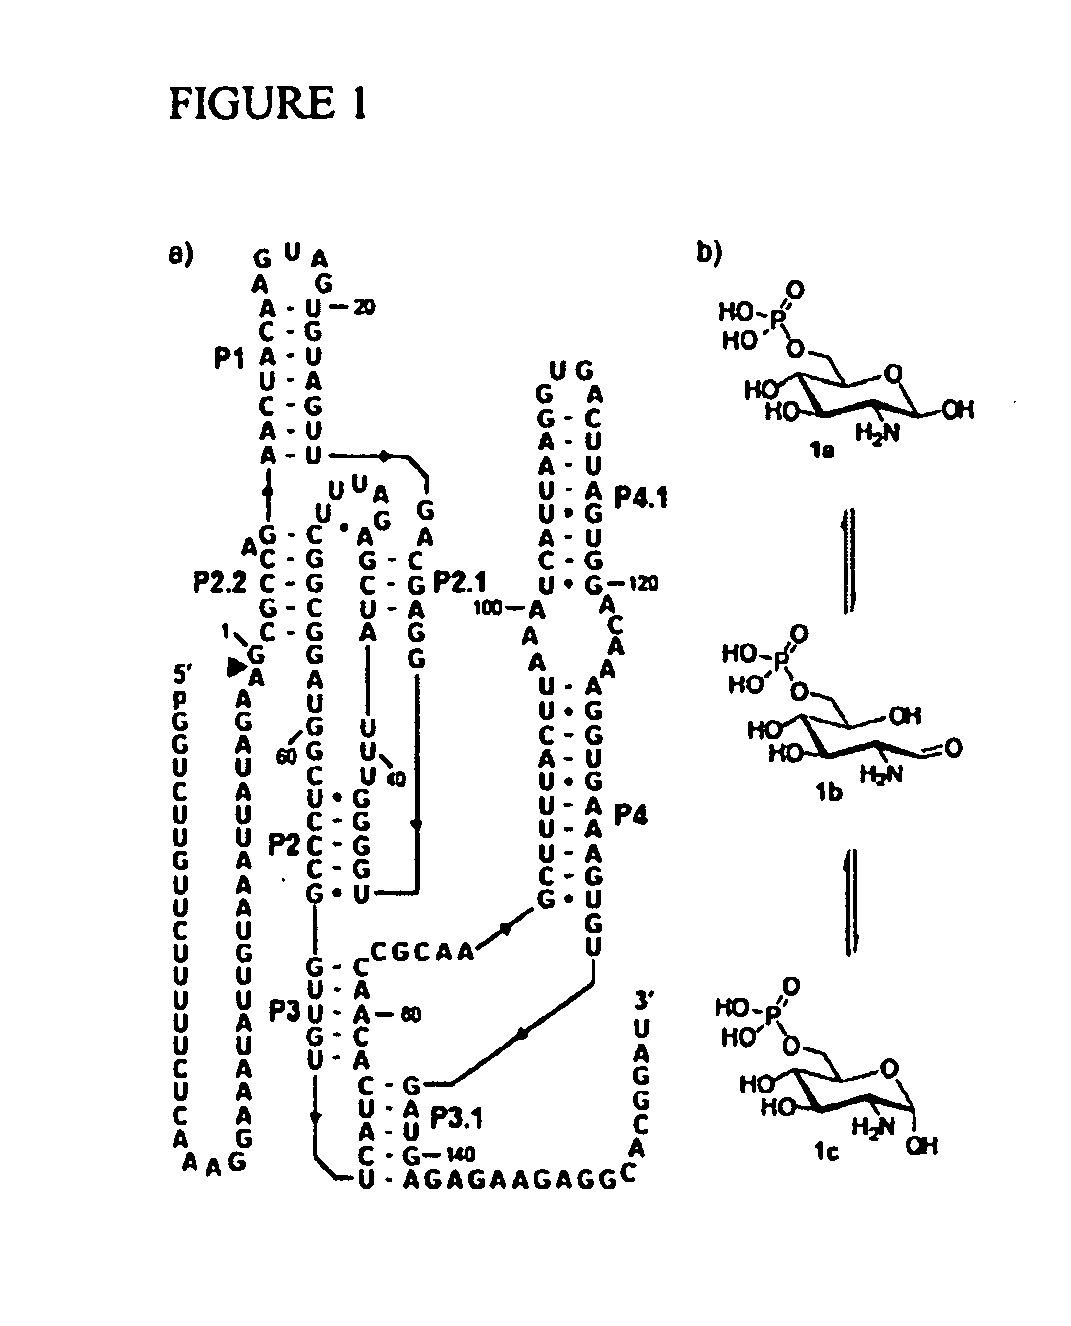 Glms riboswitches, structure-based compound design with glms riboswitches, and methods and compositions for use of and with glms riboswitches